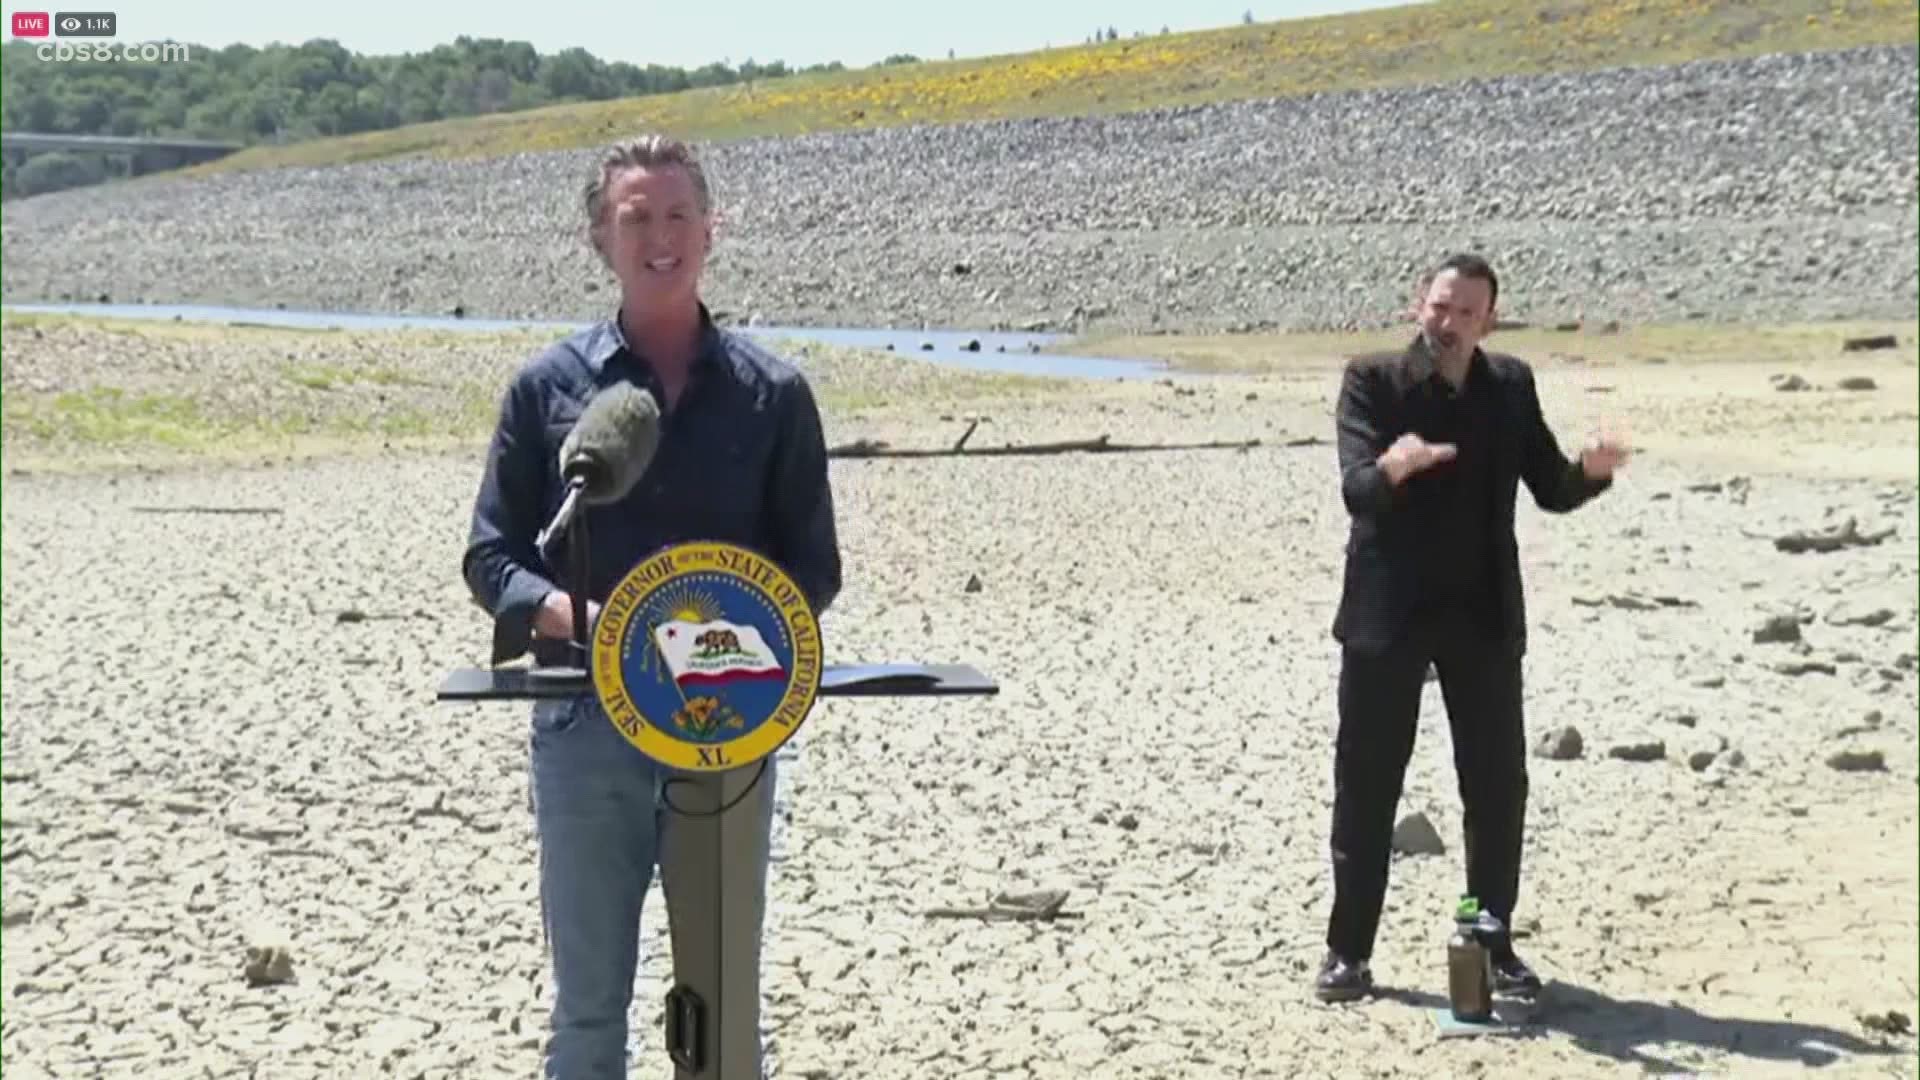 Newsom explains executive order allows other counties to be added to drought emergency